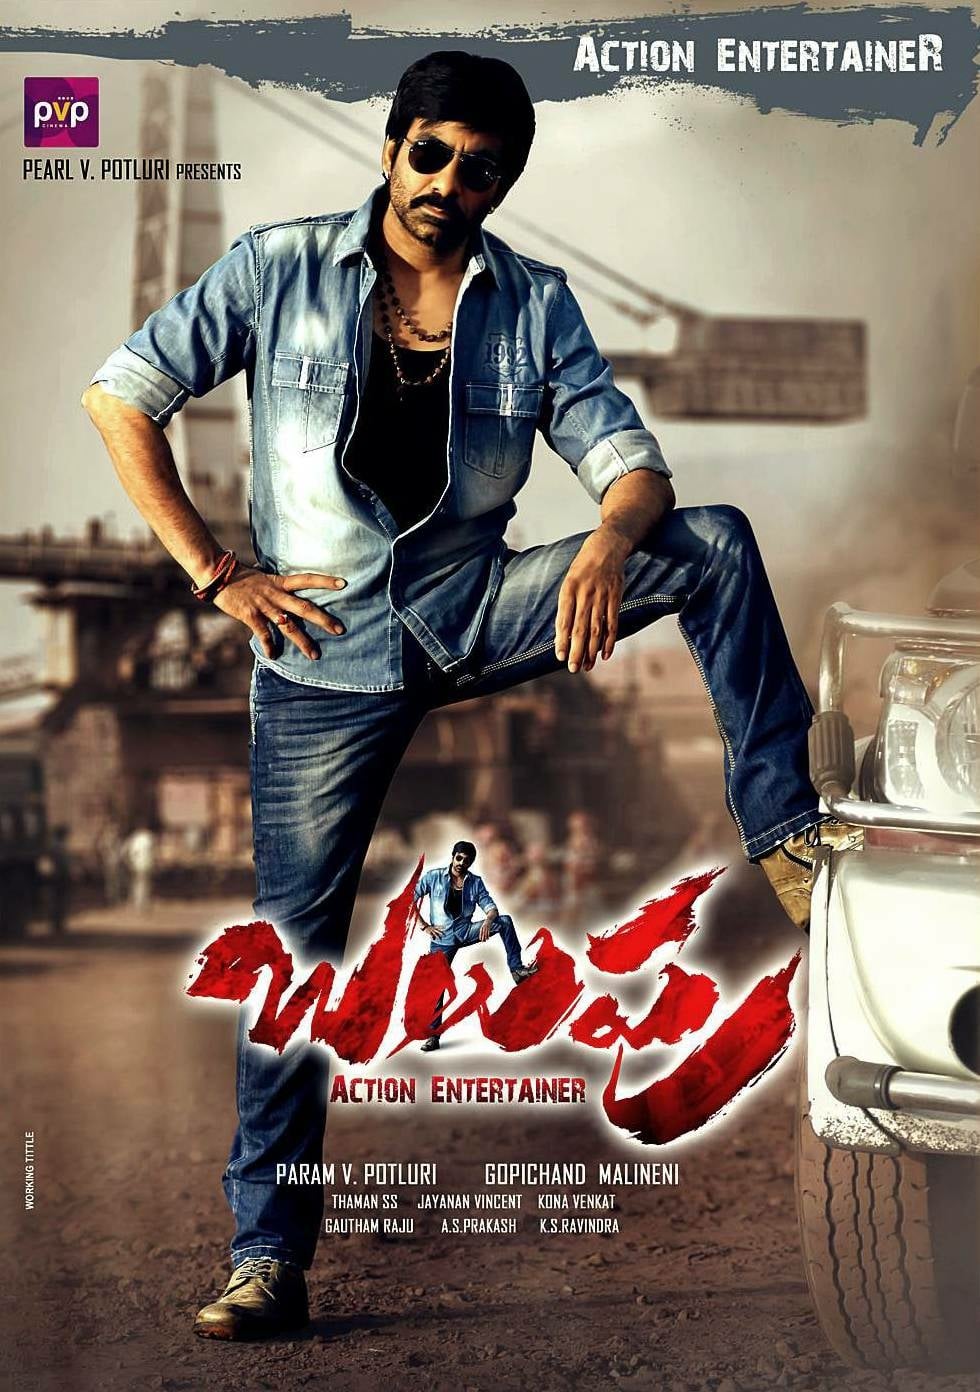 Poster for the movie "Balupu"